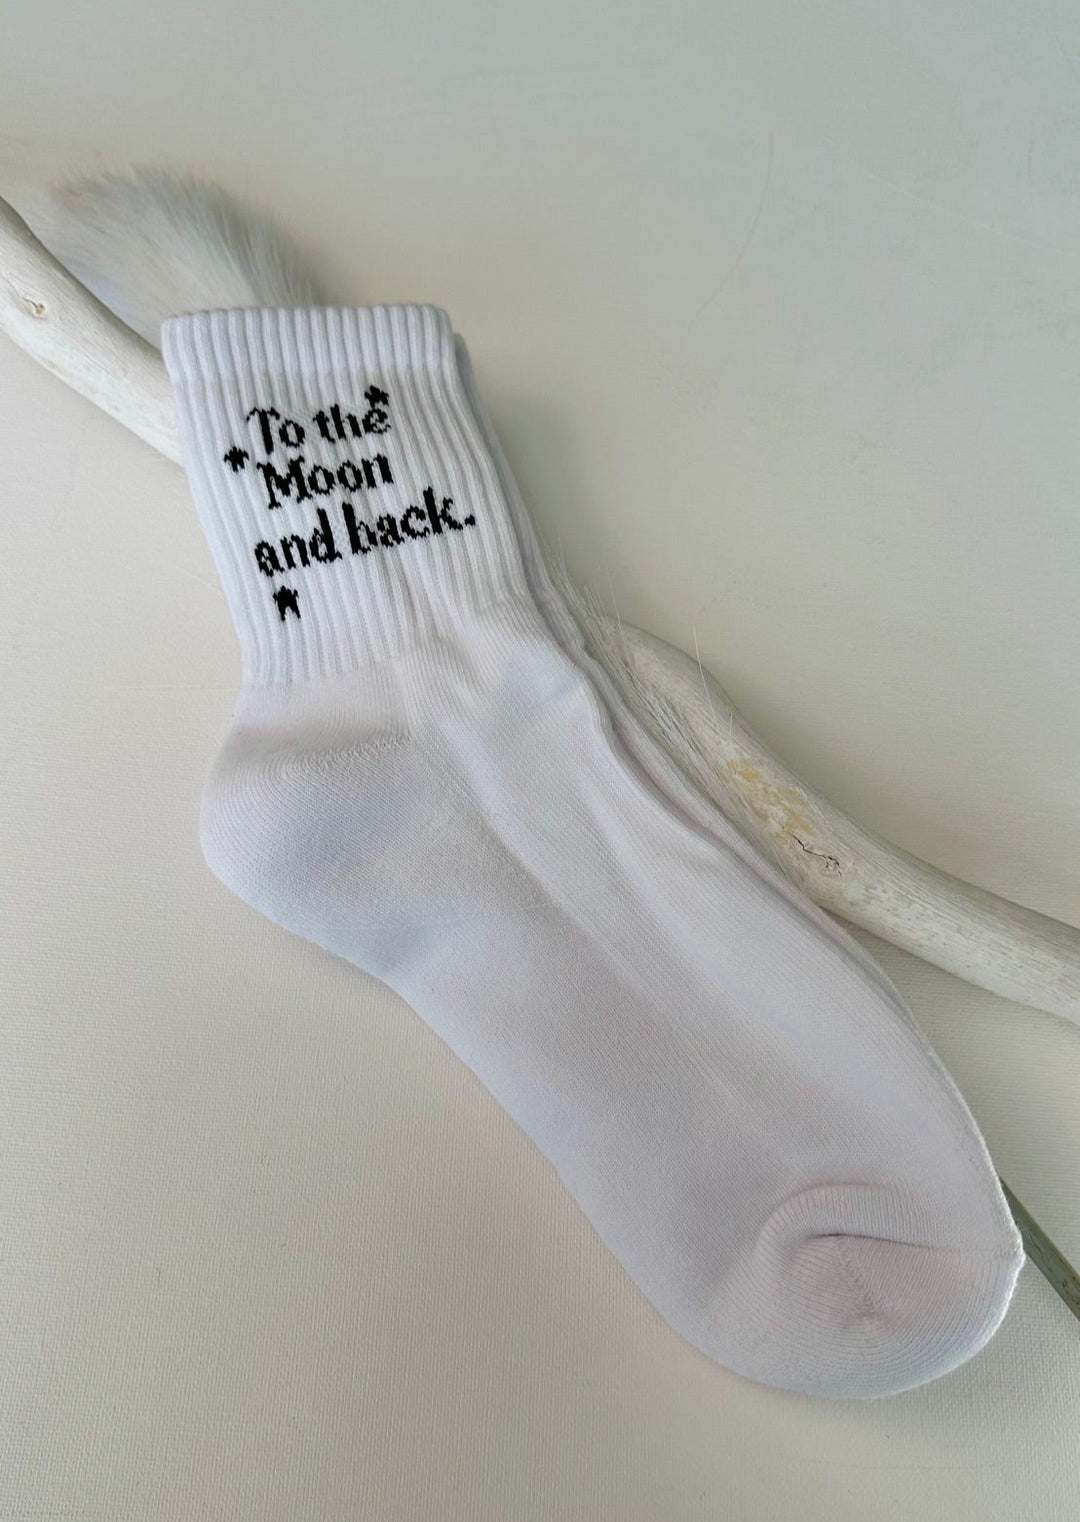 "TO THE MOON AND BACK" SOCKS